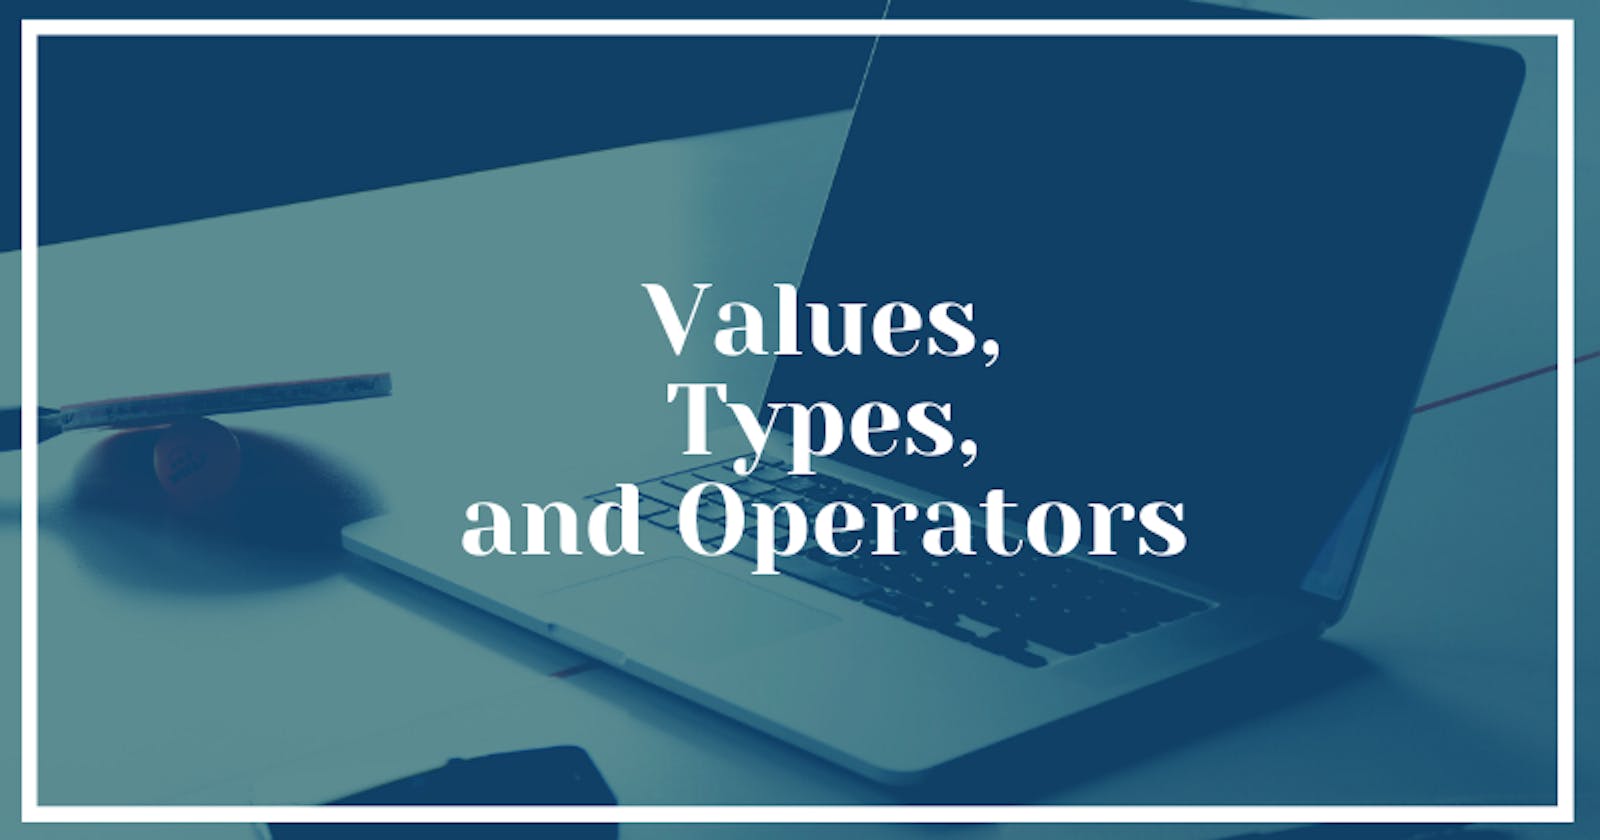 Values, Types and Operators